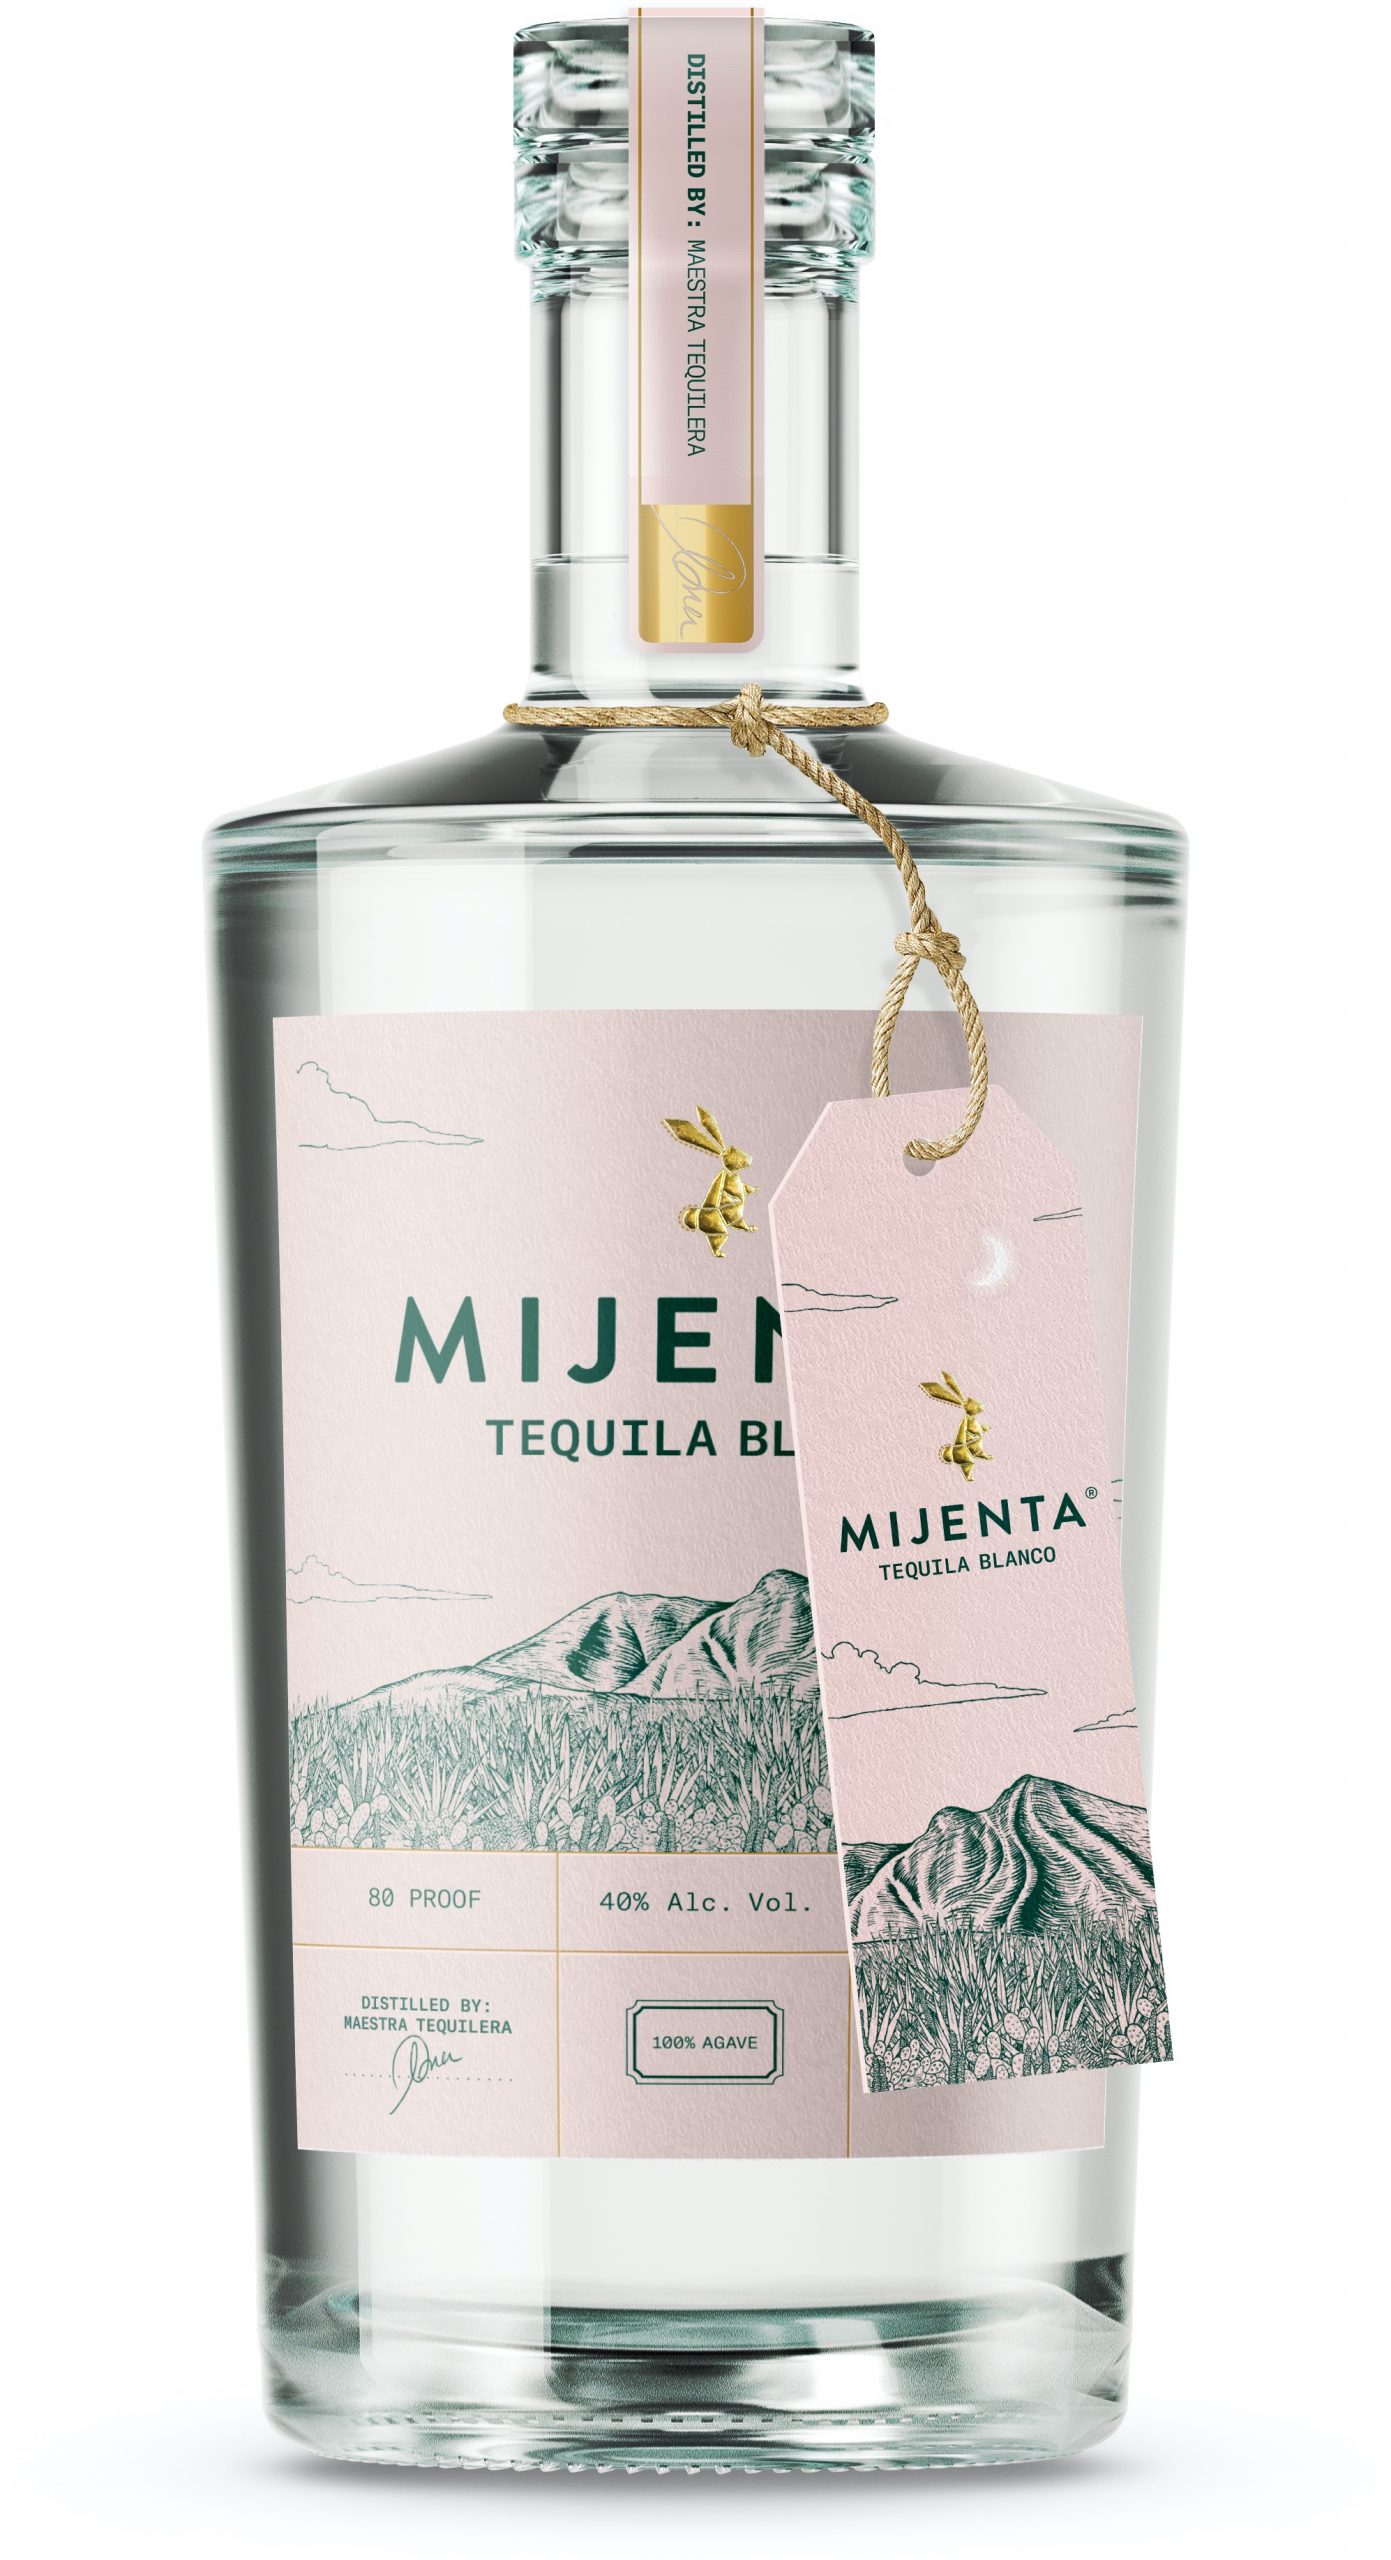 Mijenta artisanal tequila launches in the UK